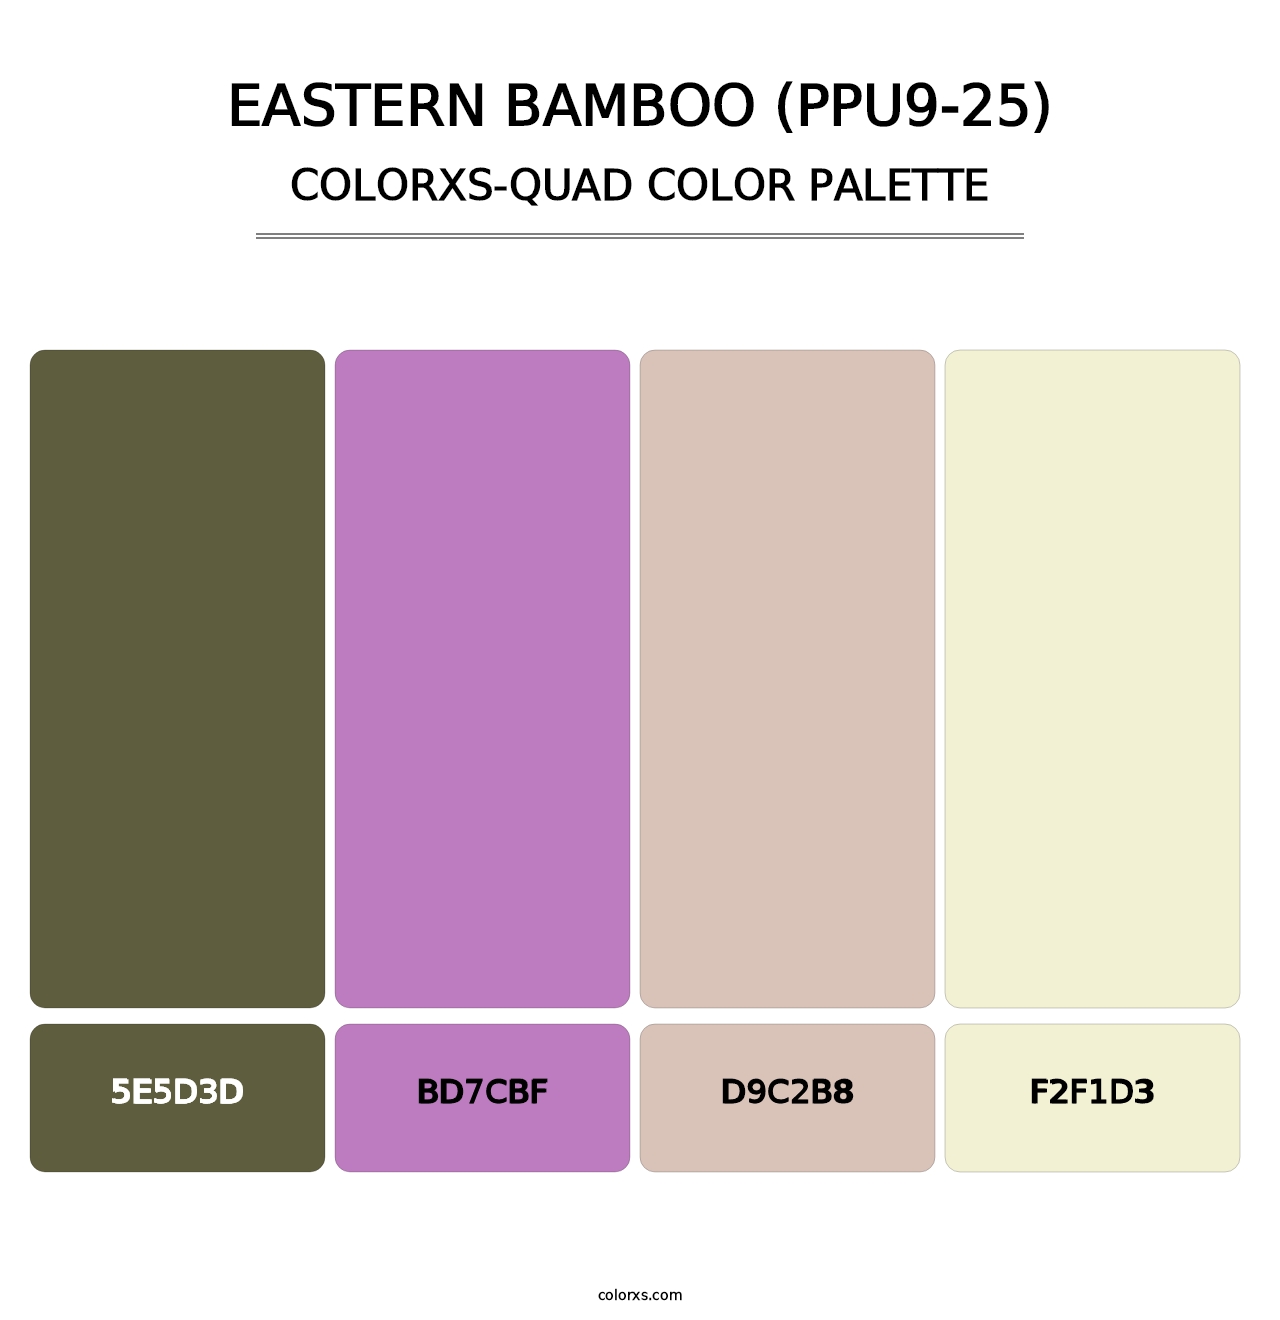 Eastern Bamboo (PPU9-25) - Colorxs Quad Palette